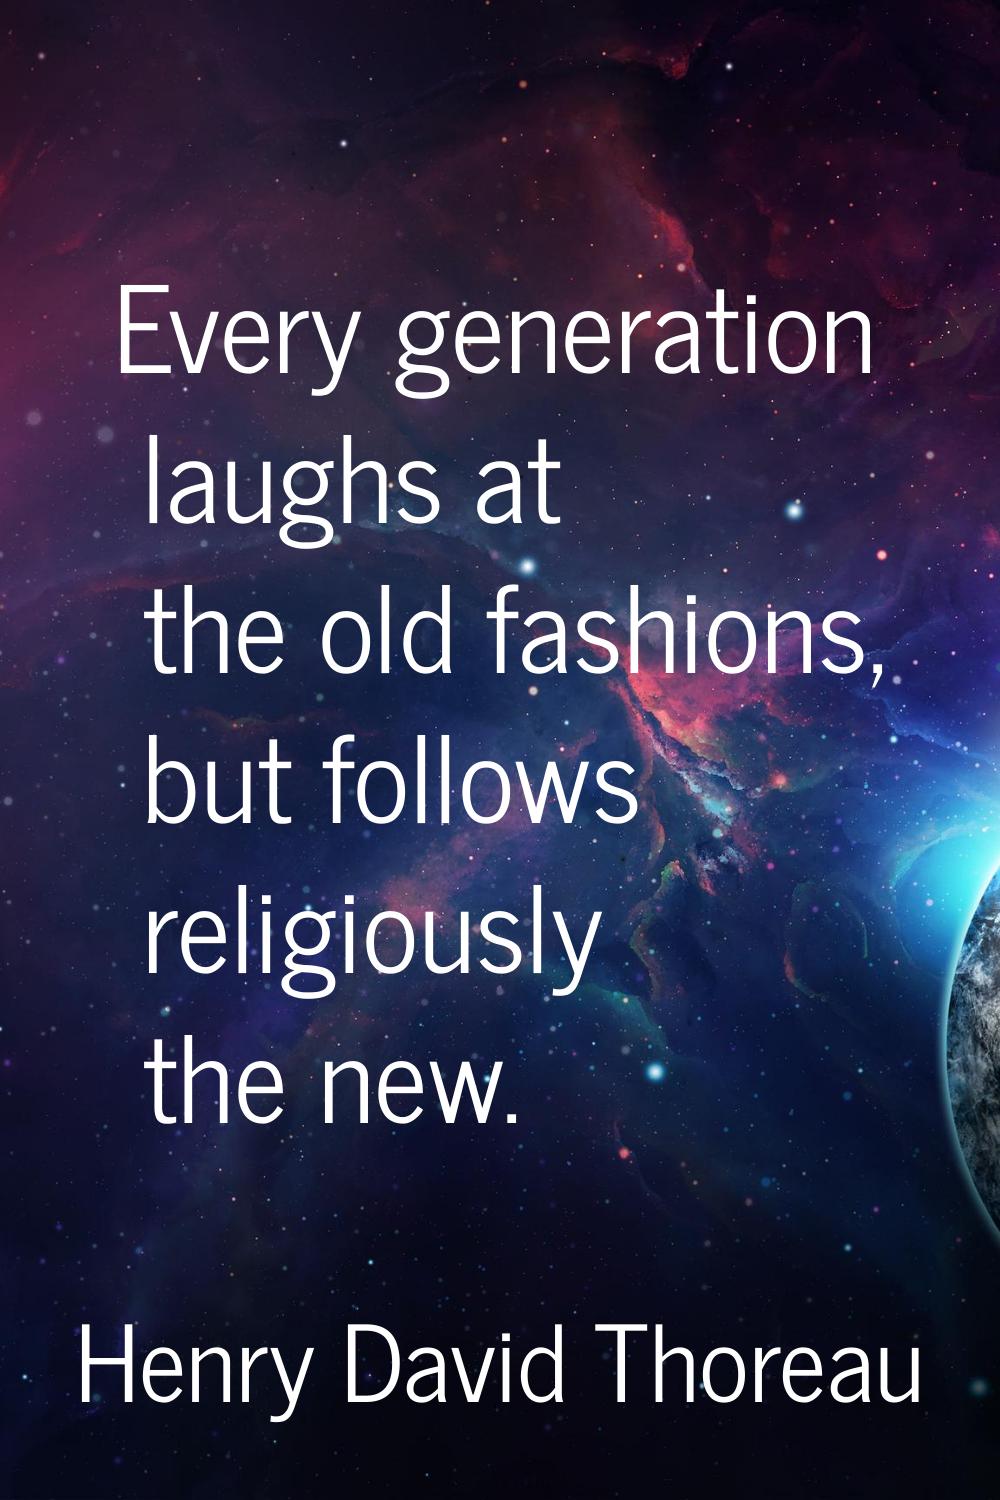 Every generation laughs at the old fashions, but follows religiously the new.